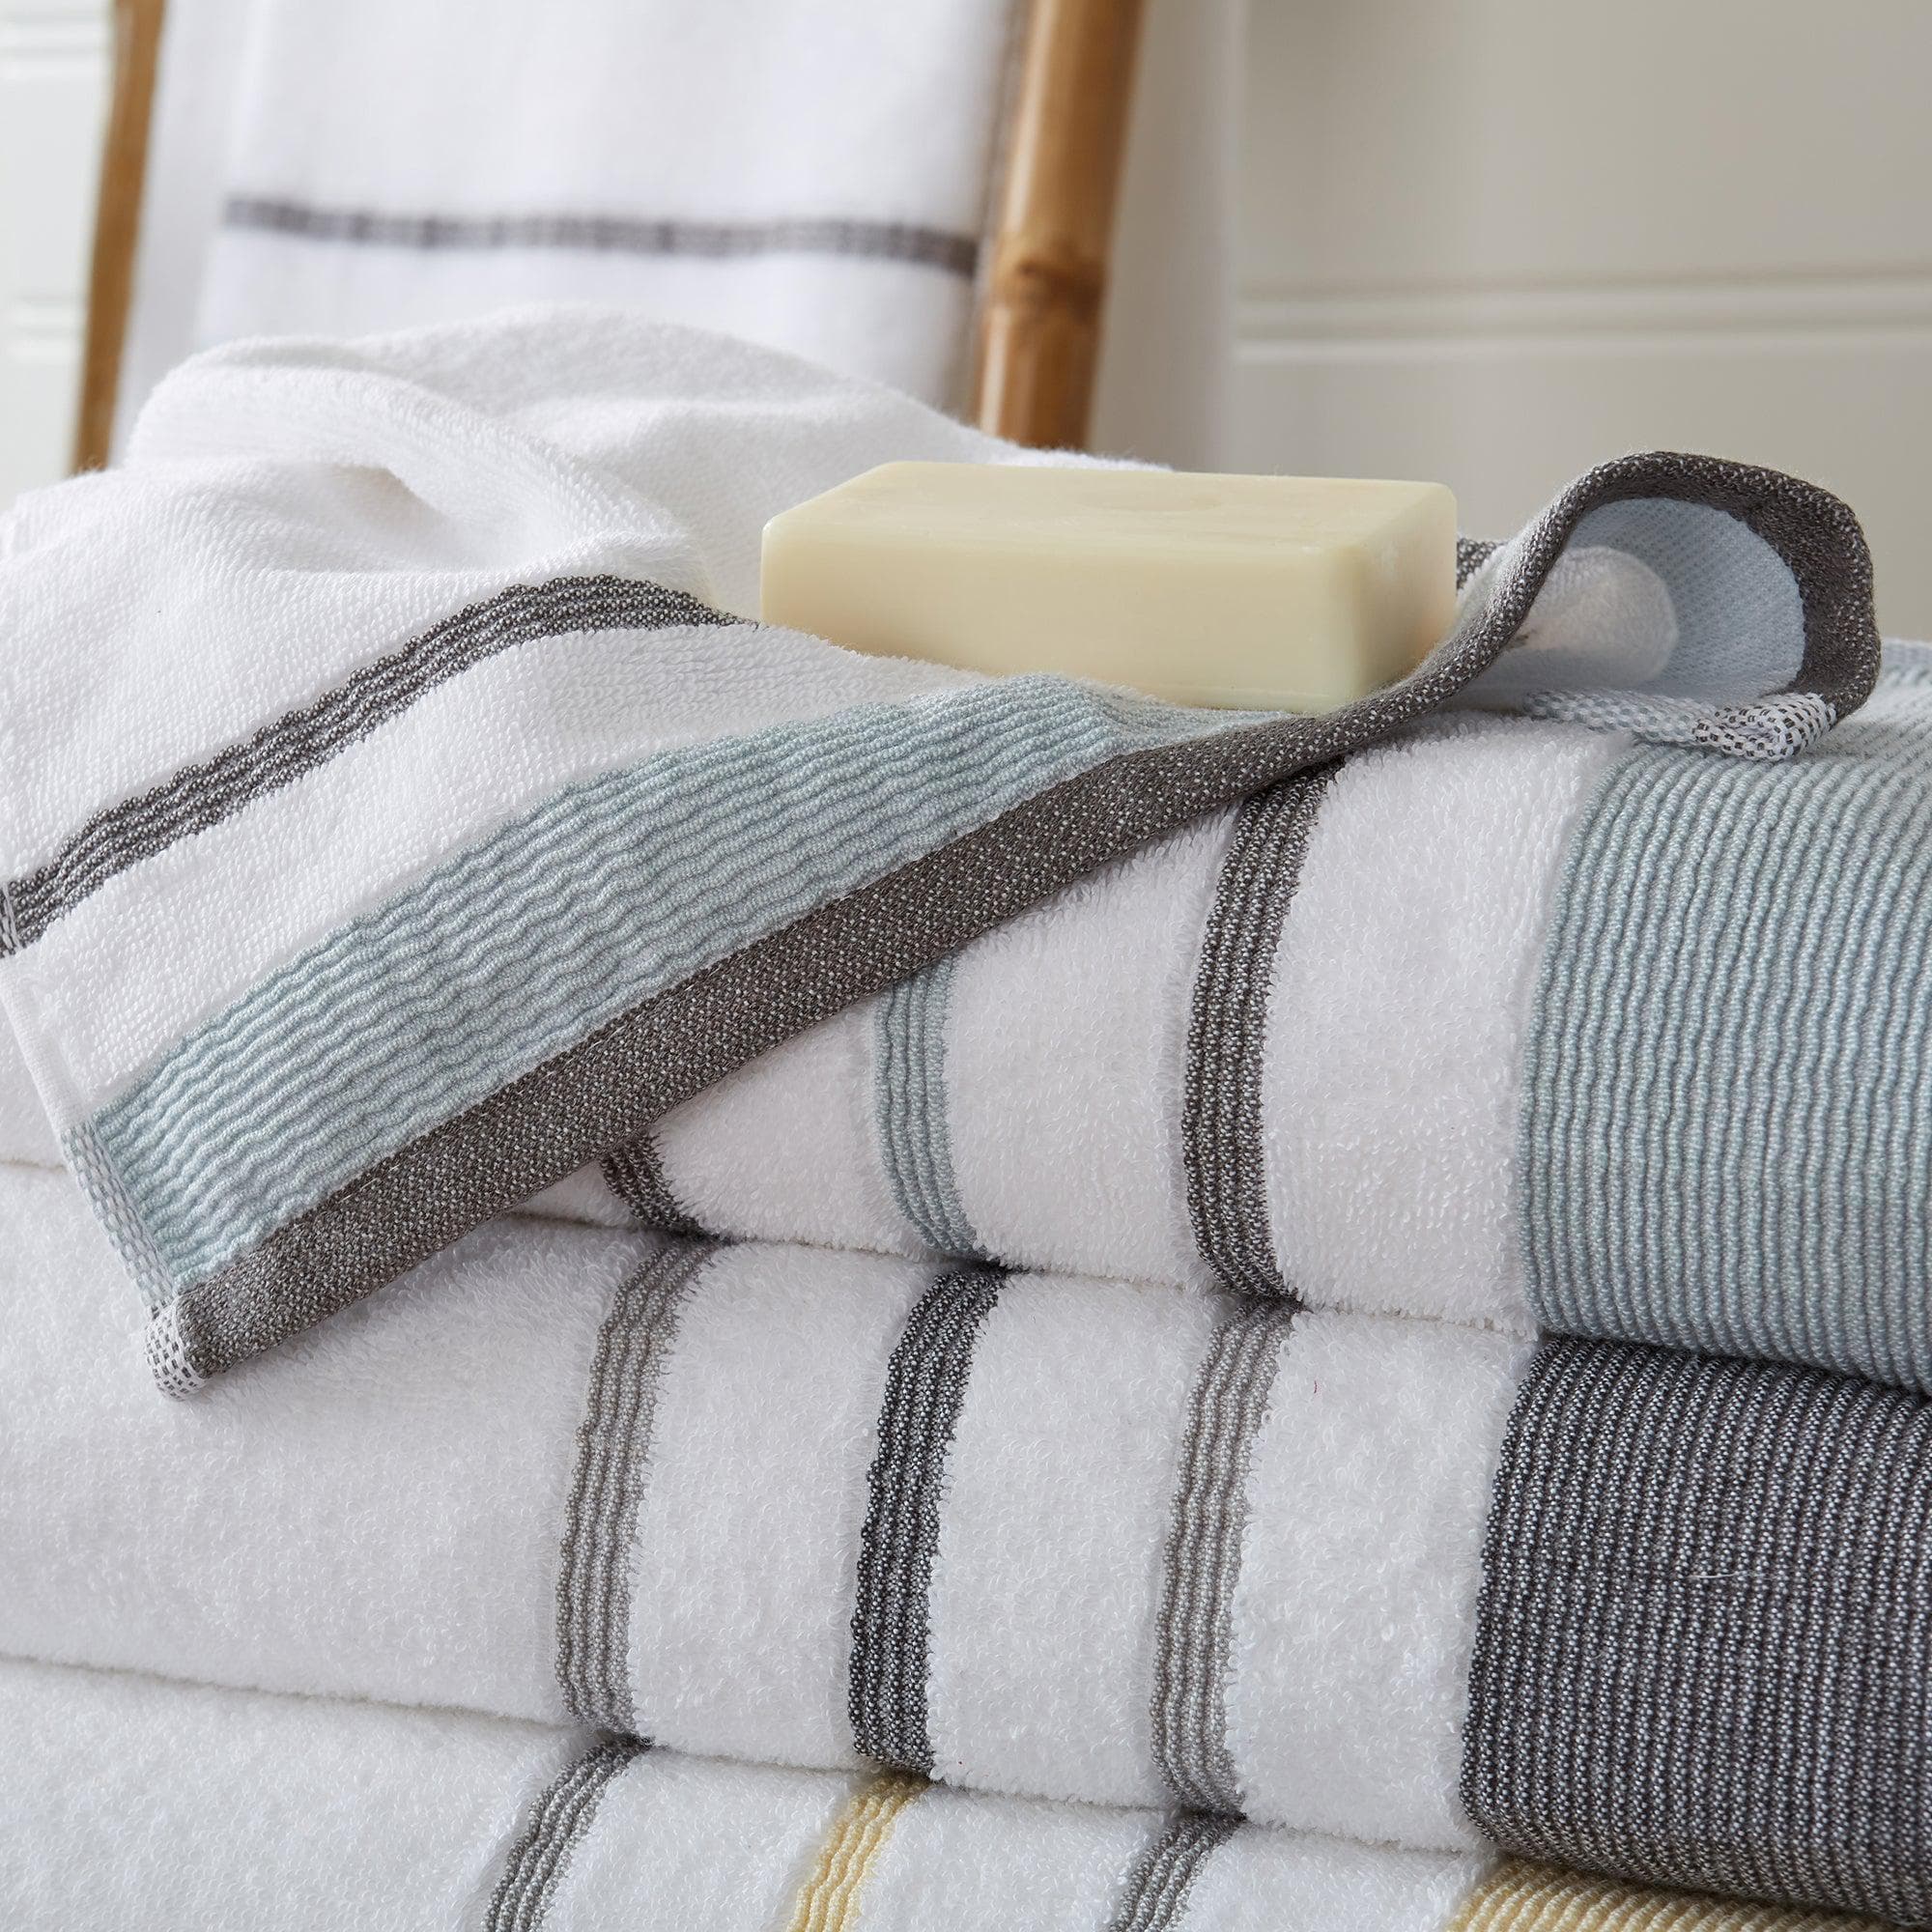 6-Piece Cotton Bath Towel  Noelle Collection by Great Bay Home